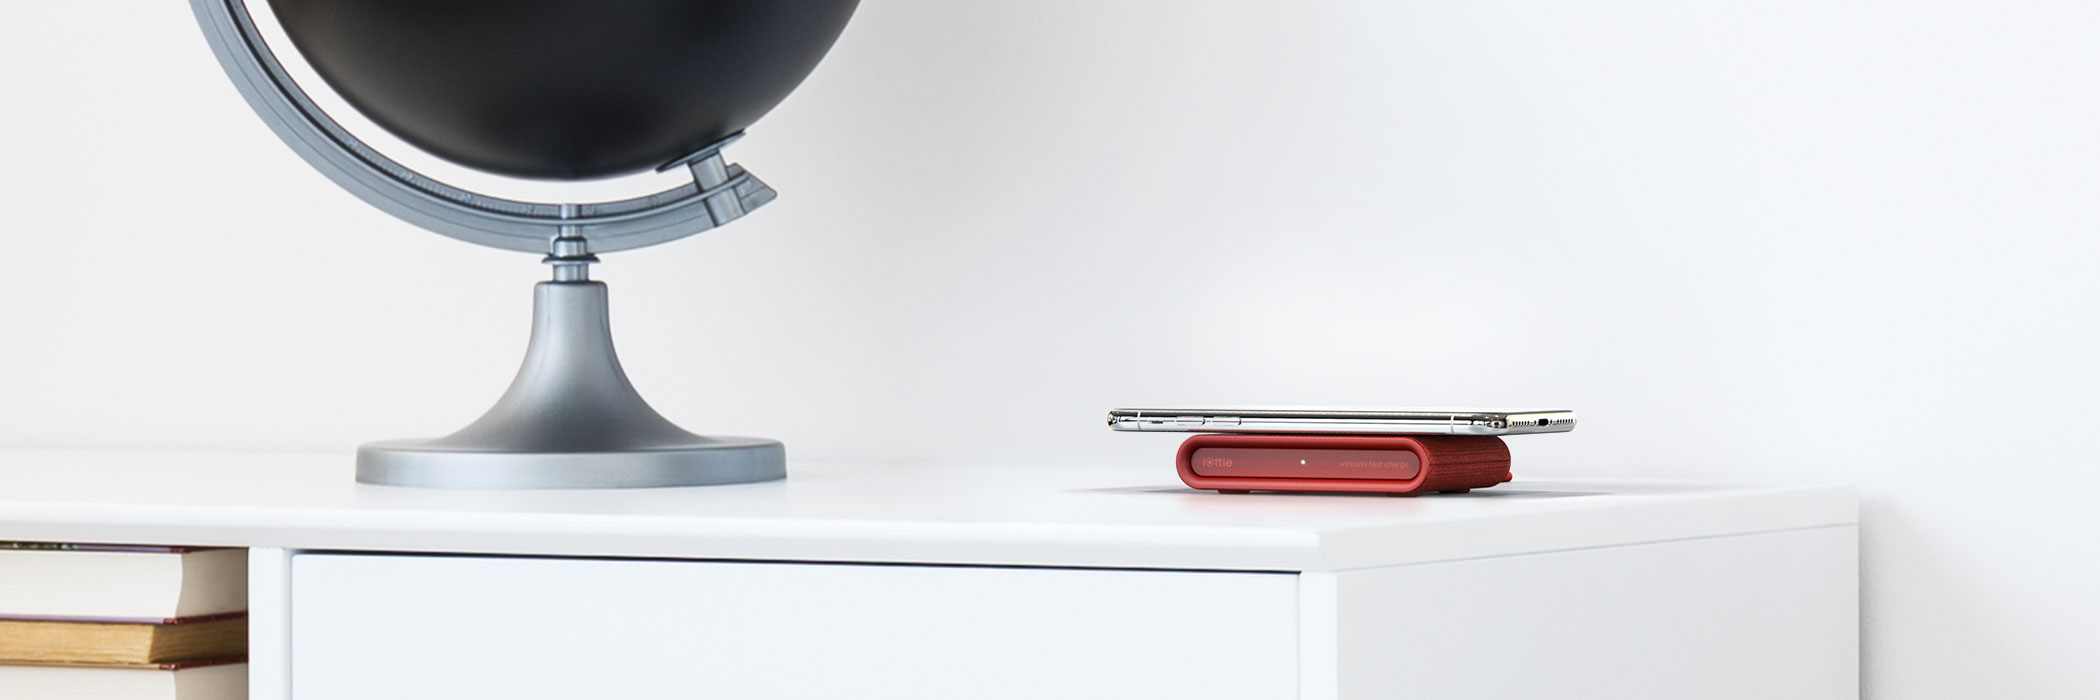 iON Wireless Mini Charging Pad in Ruby on an Office Desk